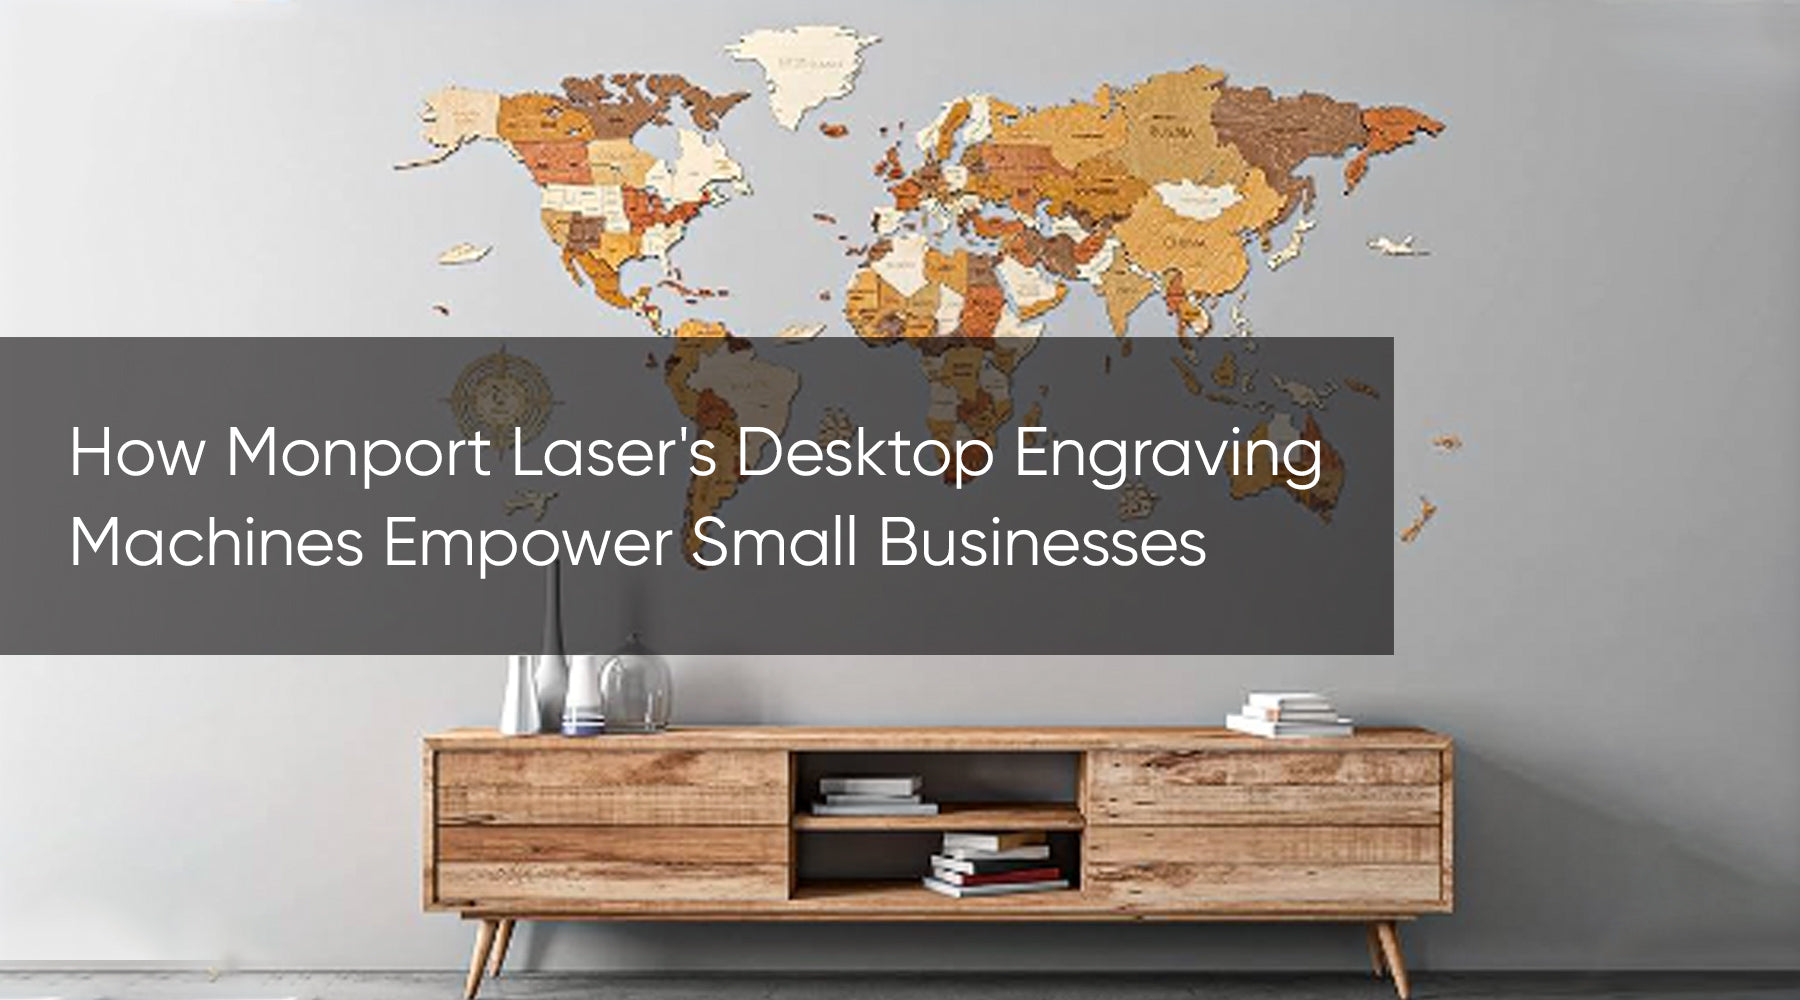 How Monport Laser's Desktop Engraving Machines Empower Small Businesses